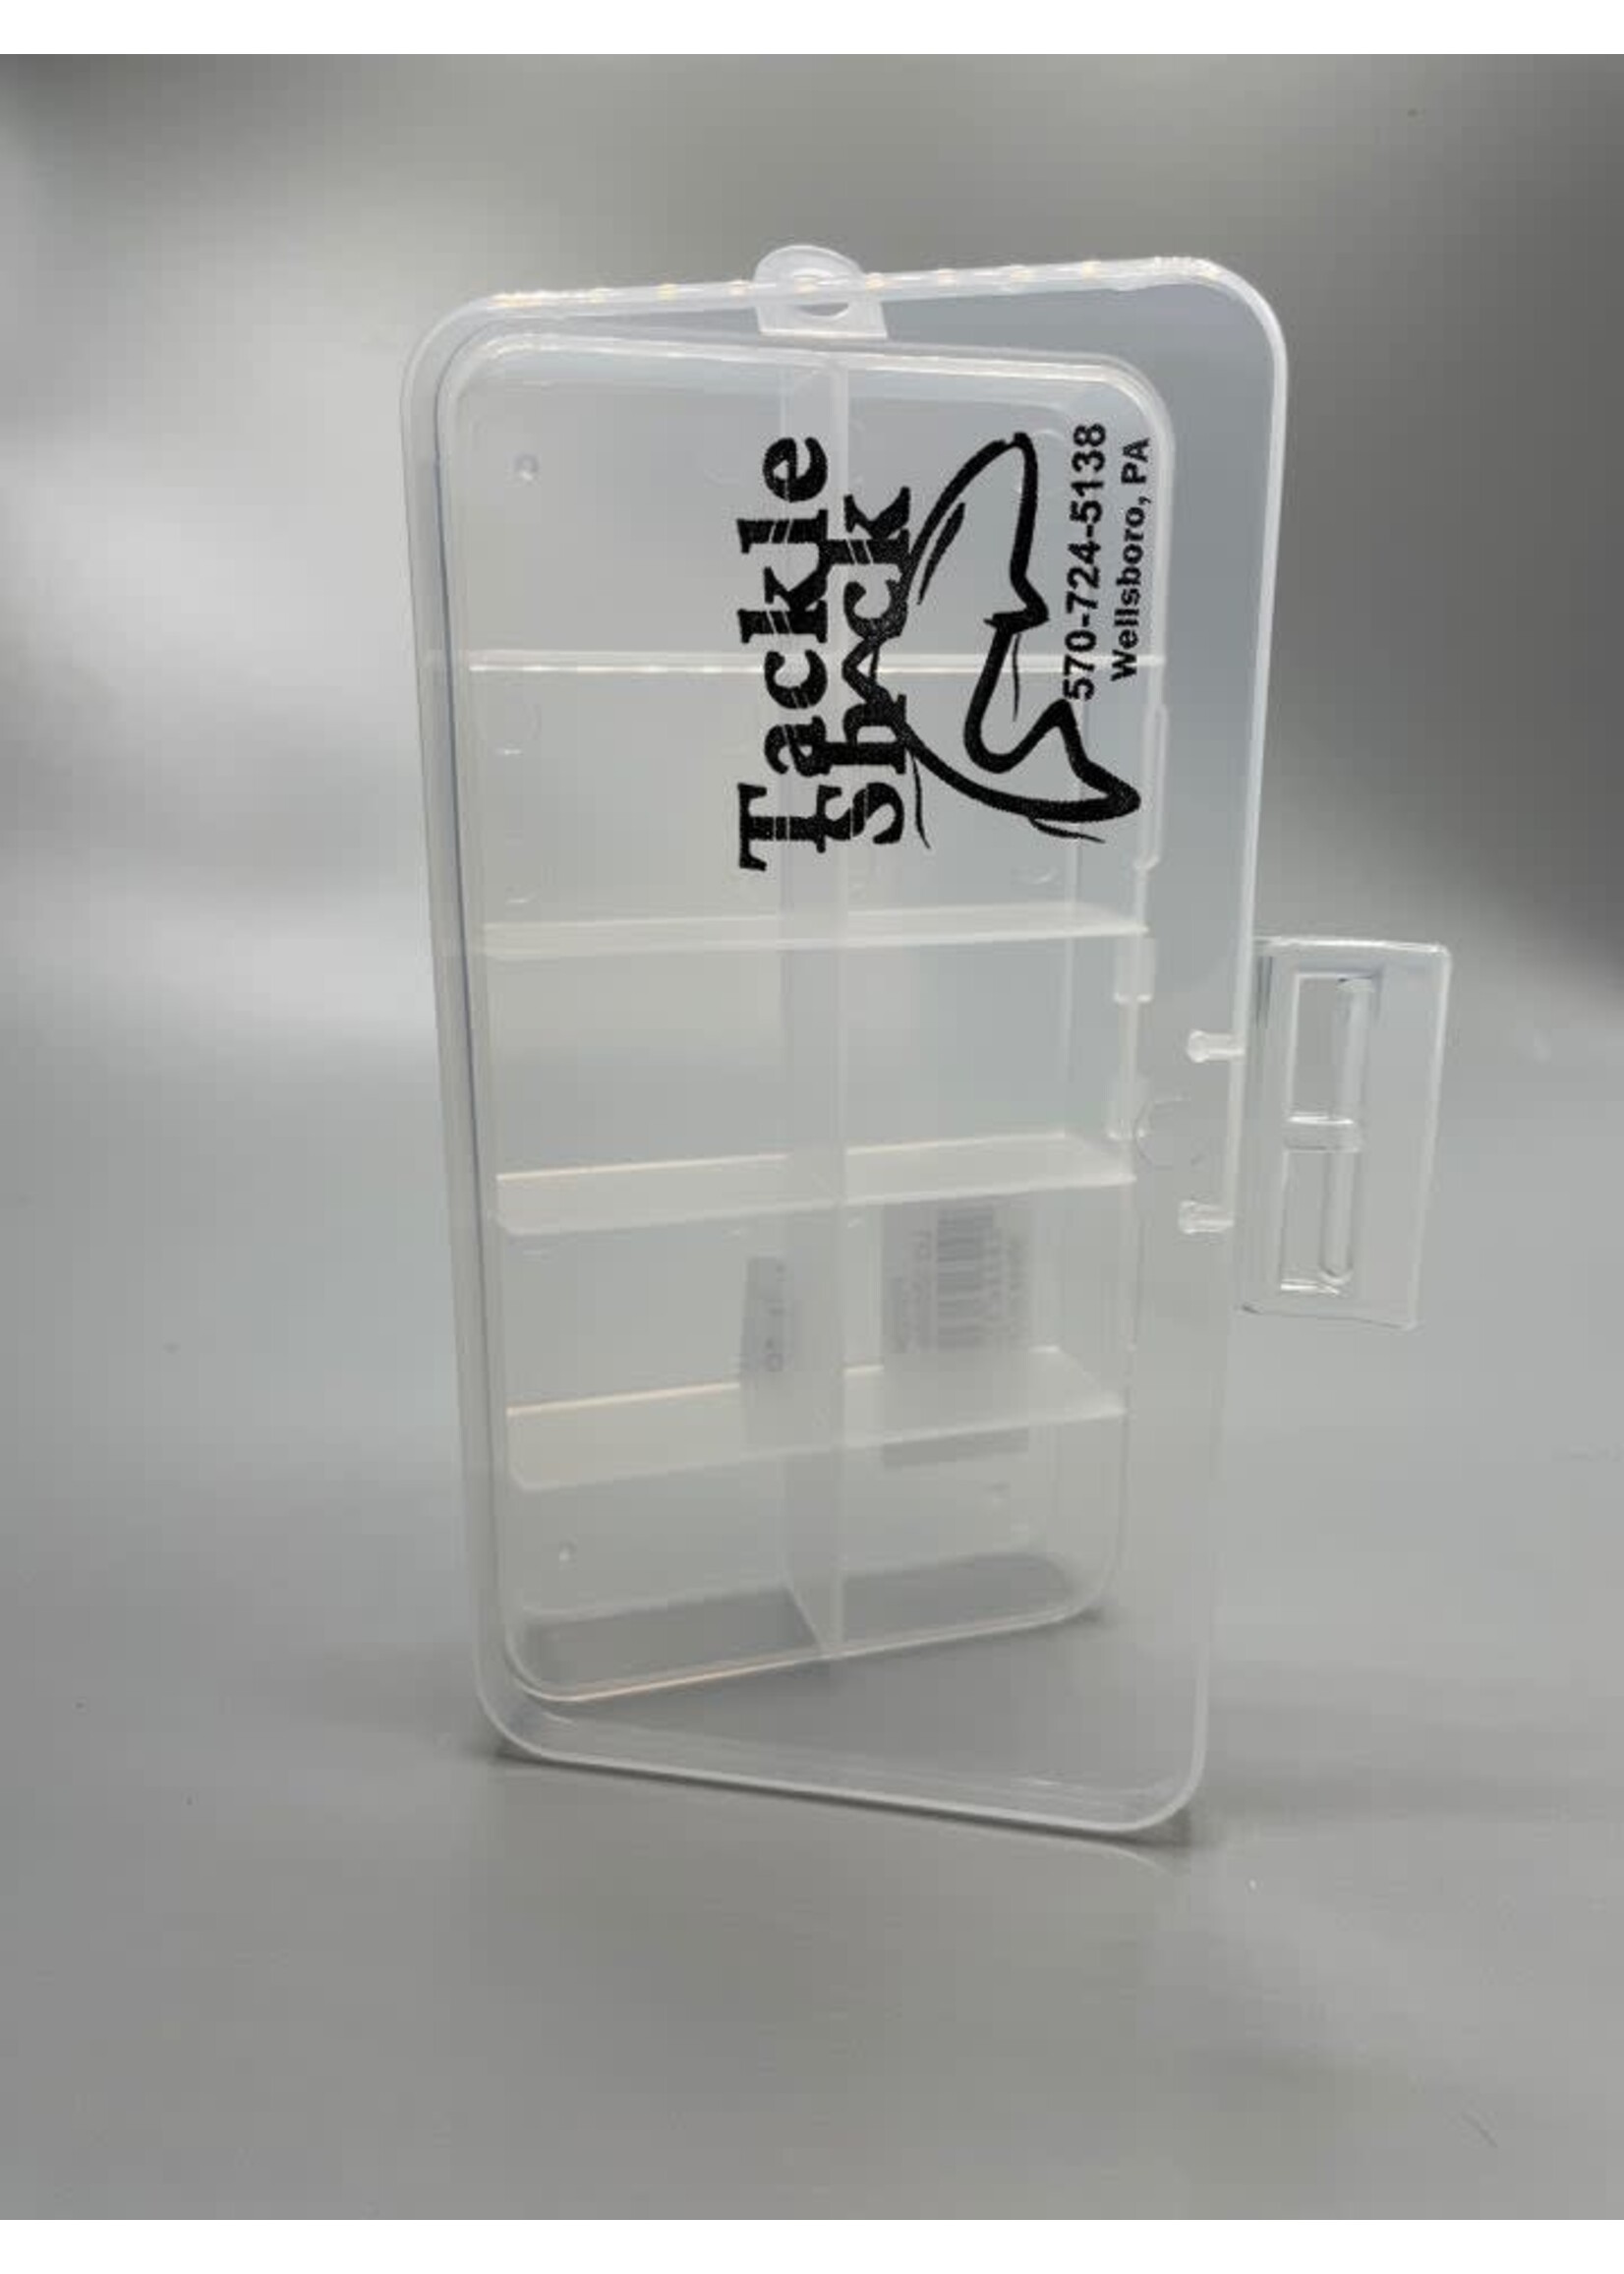 New Phase Tackle Shack 10 Compartment Clear Poly Box FG1234